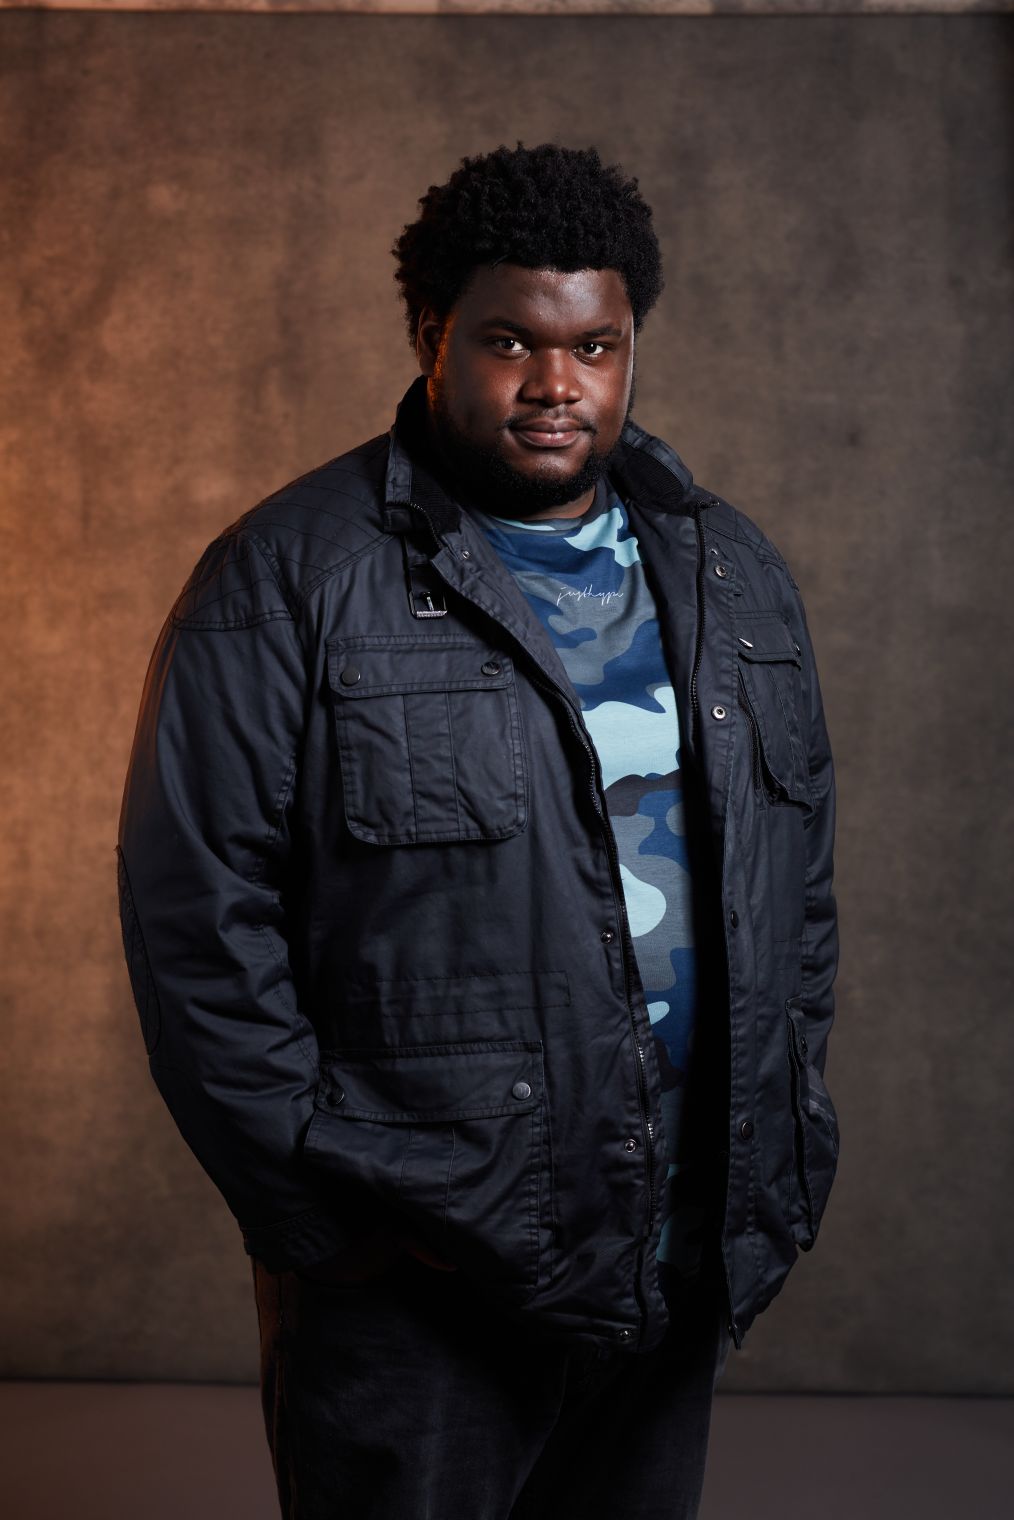 Tuwaine Barrett stars in major new 4-part drama You Don't Know Me premiering on Sunday night on BBC One & iPlayer